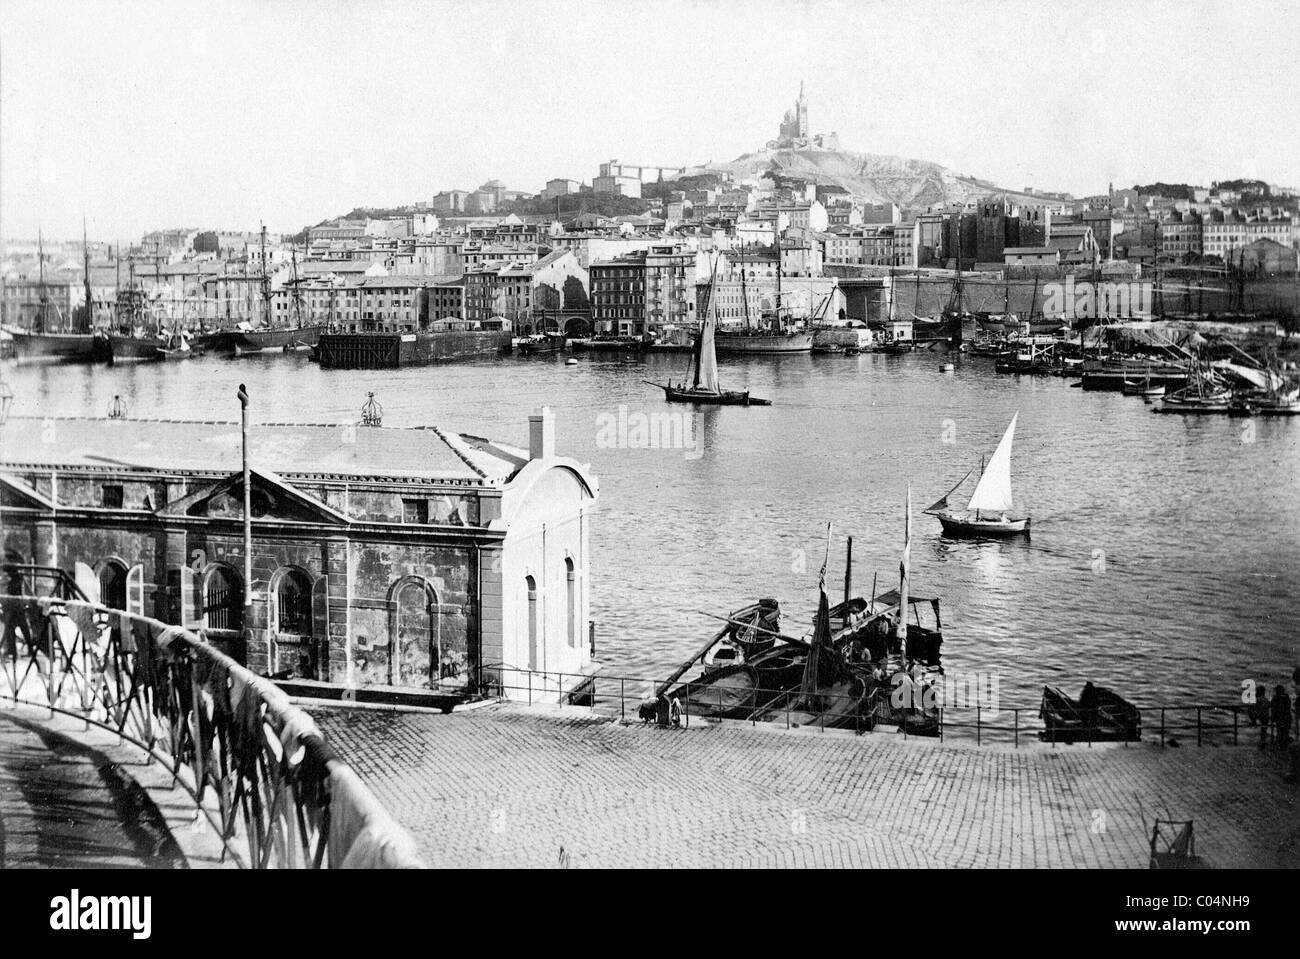 Townscape, Cityscape or View of the Old Port with Yachts or Sailing Boats, Marseille or Marseilles, and the Basilica of Notre-Dame de la Garde France c1890 Stock Photo